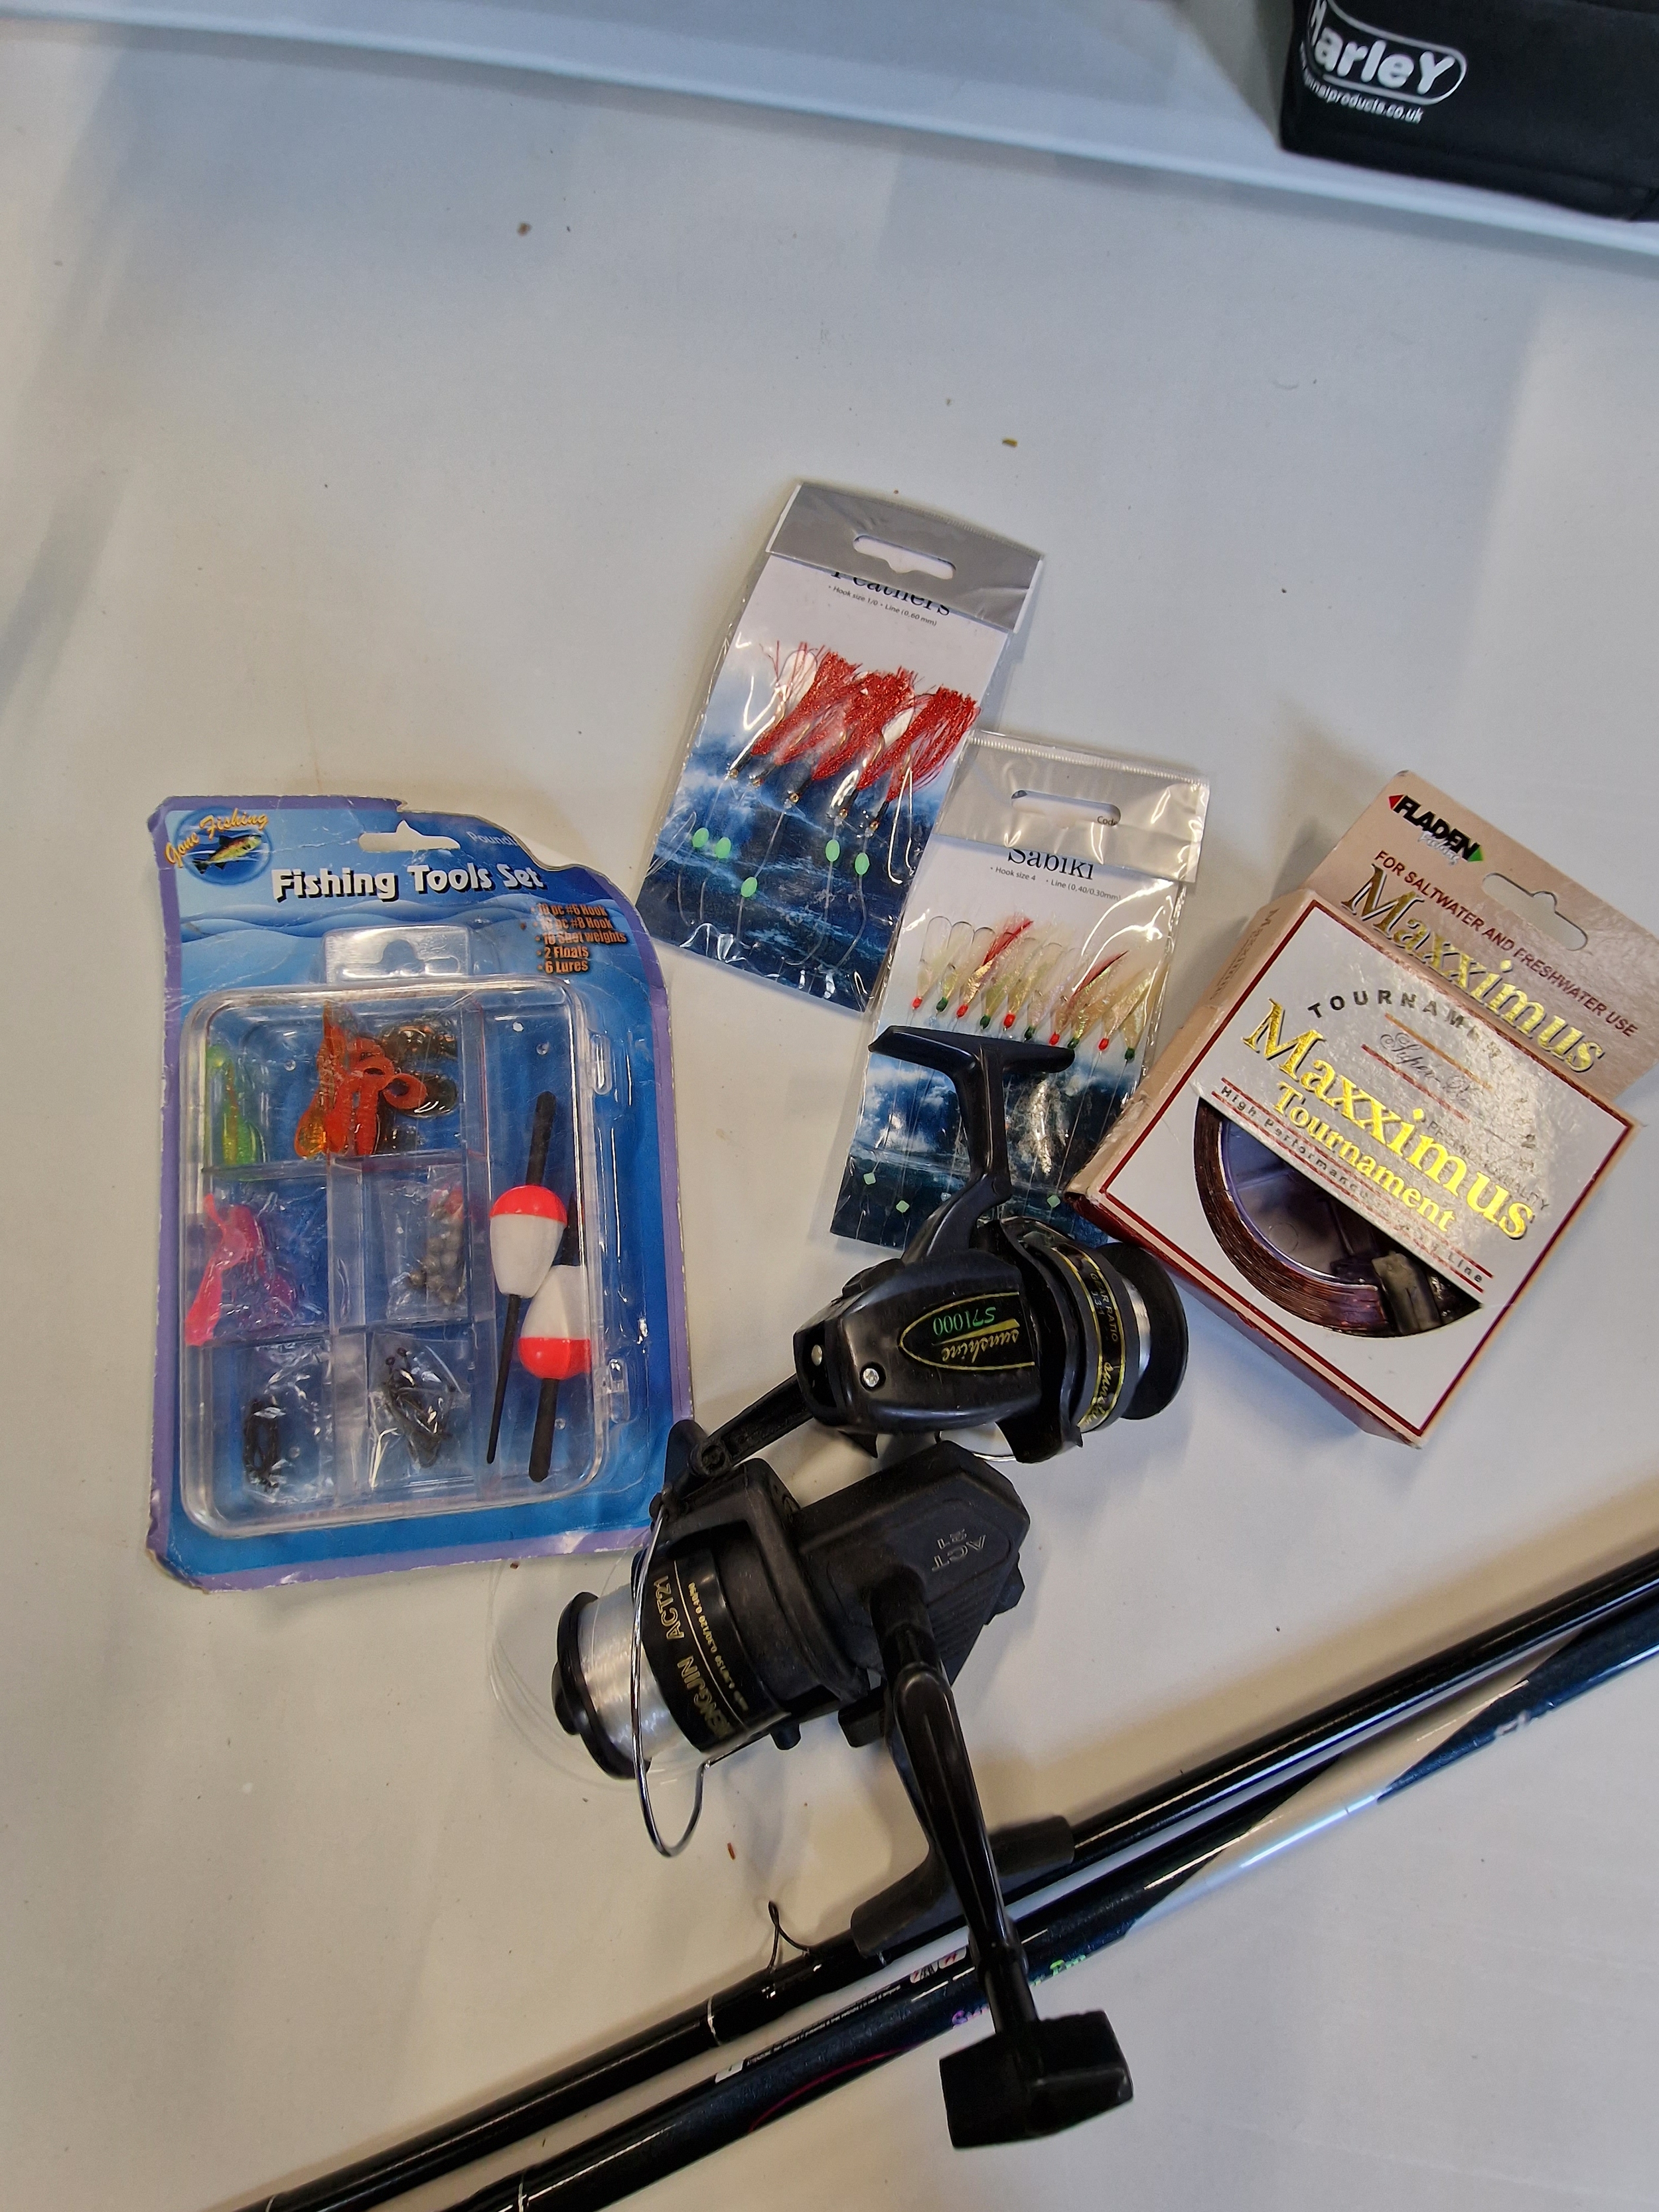 Ron Thompson Superior Pro 9ft # 6/7 fishing pole and reels. Additional  fishing line, fishing tool s